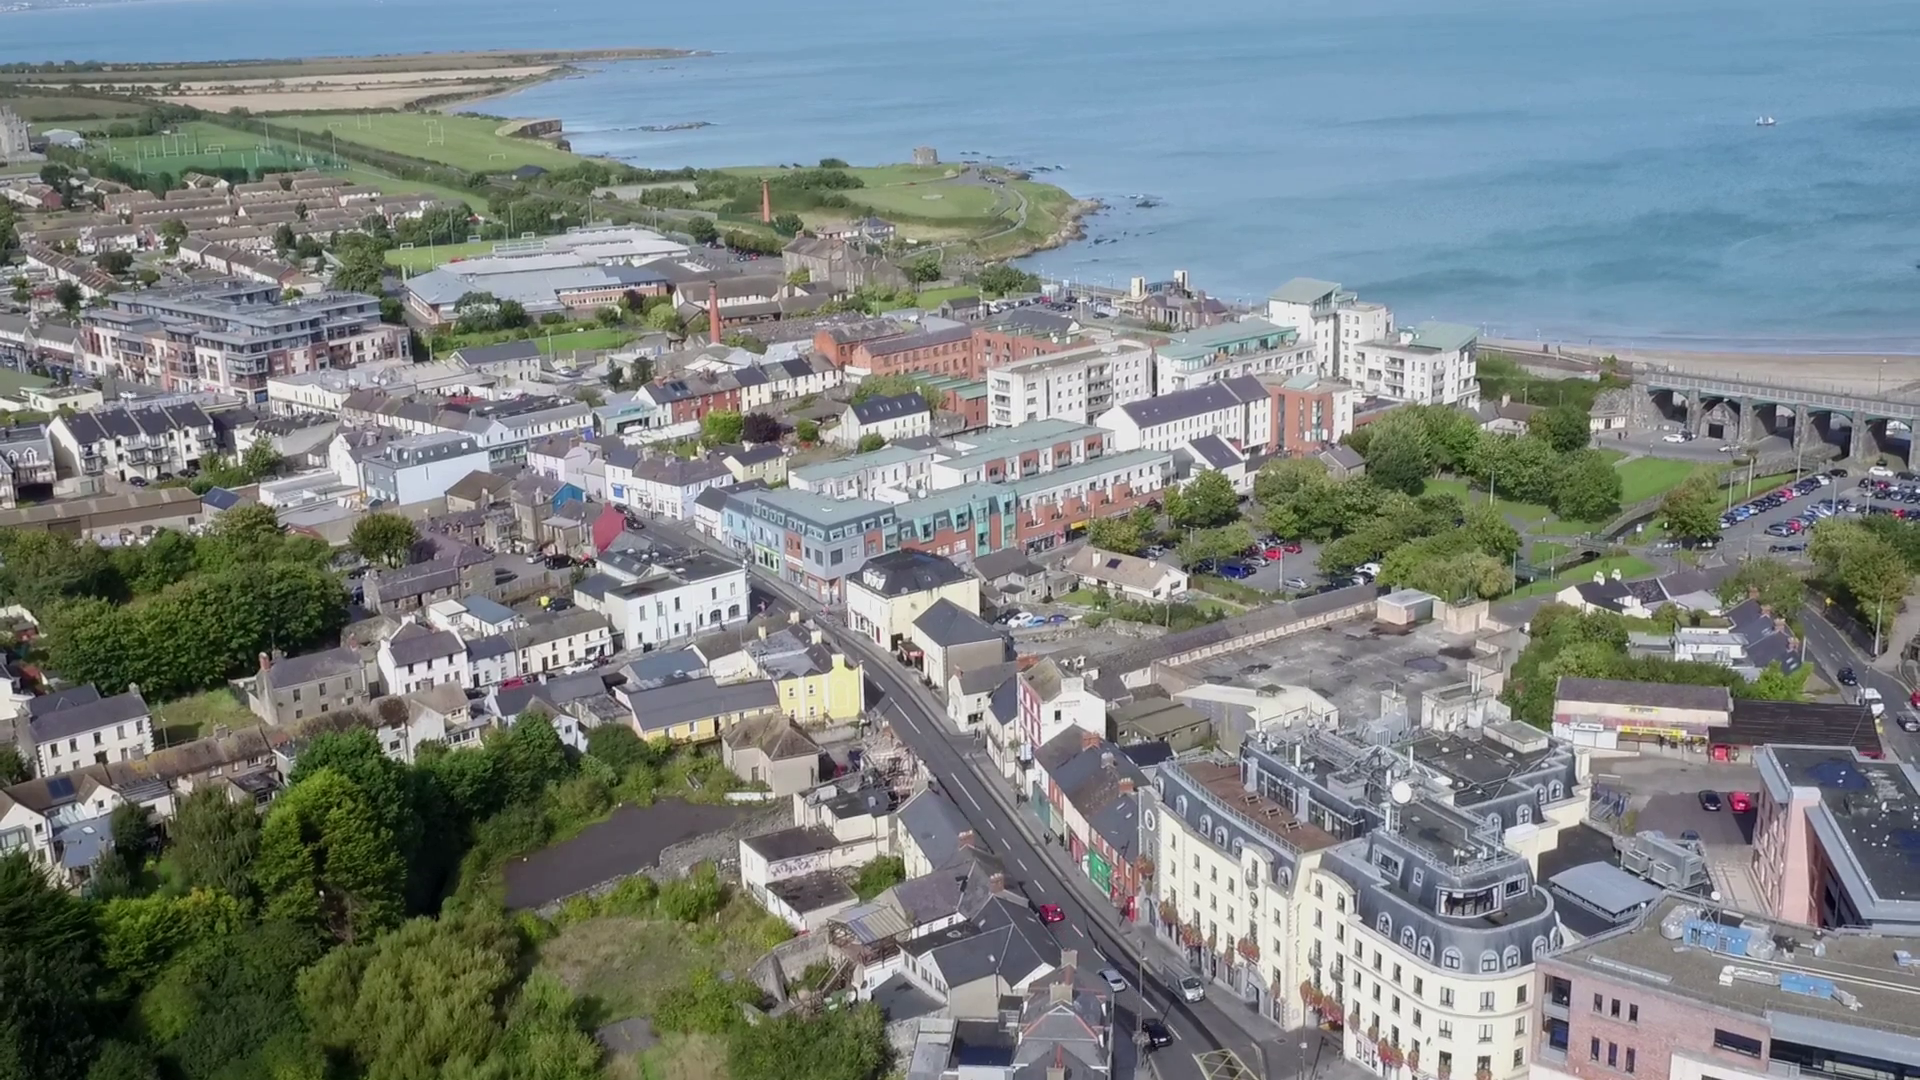 Aerial shot of Balbriggan from the south towards the Harbour